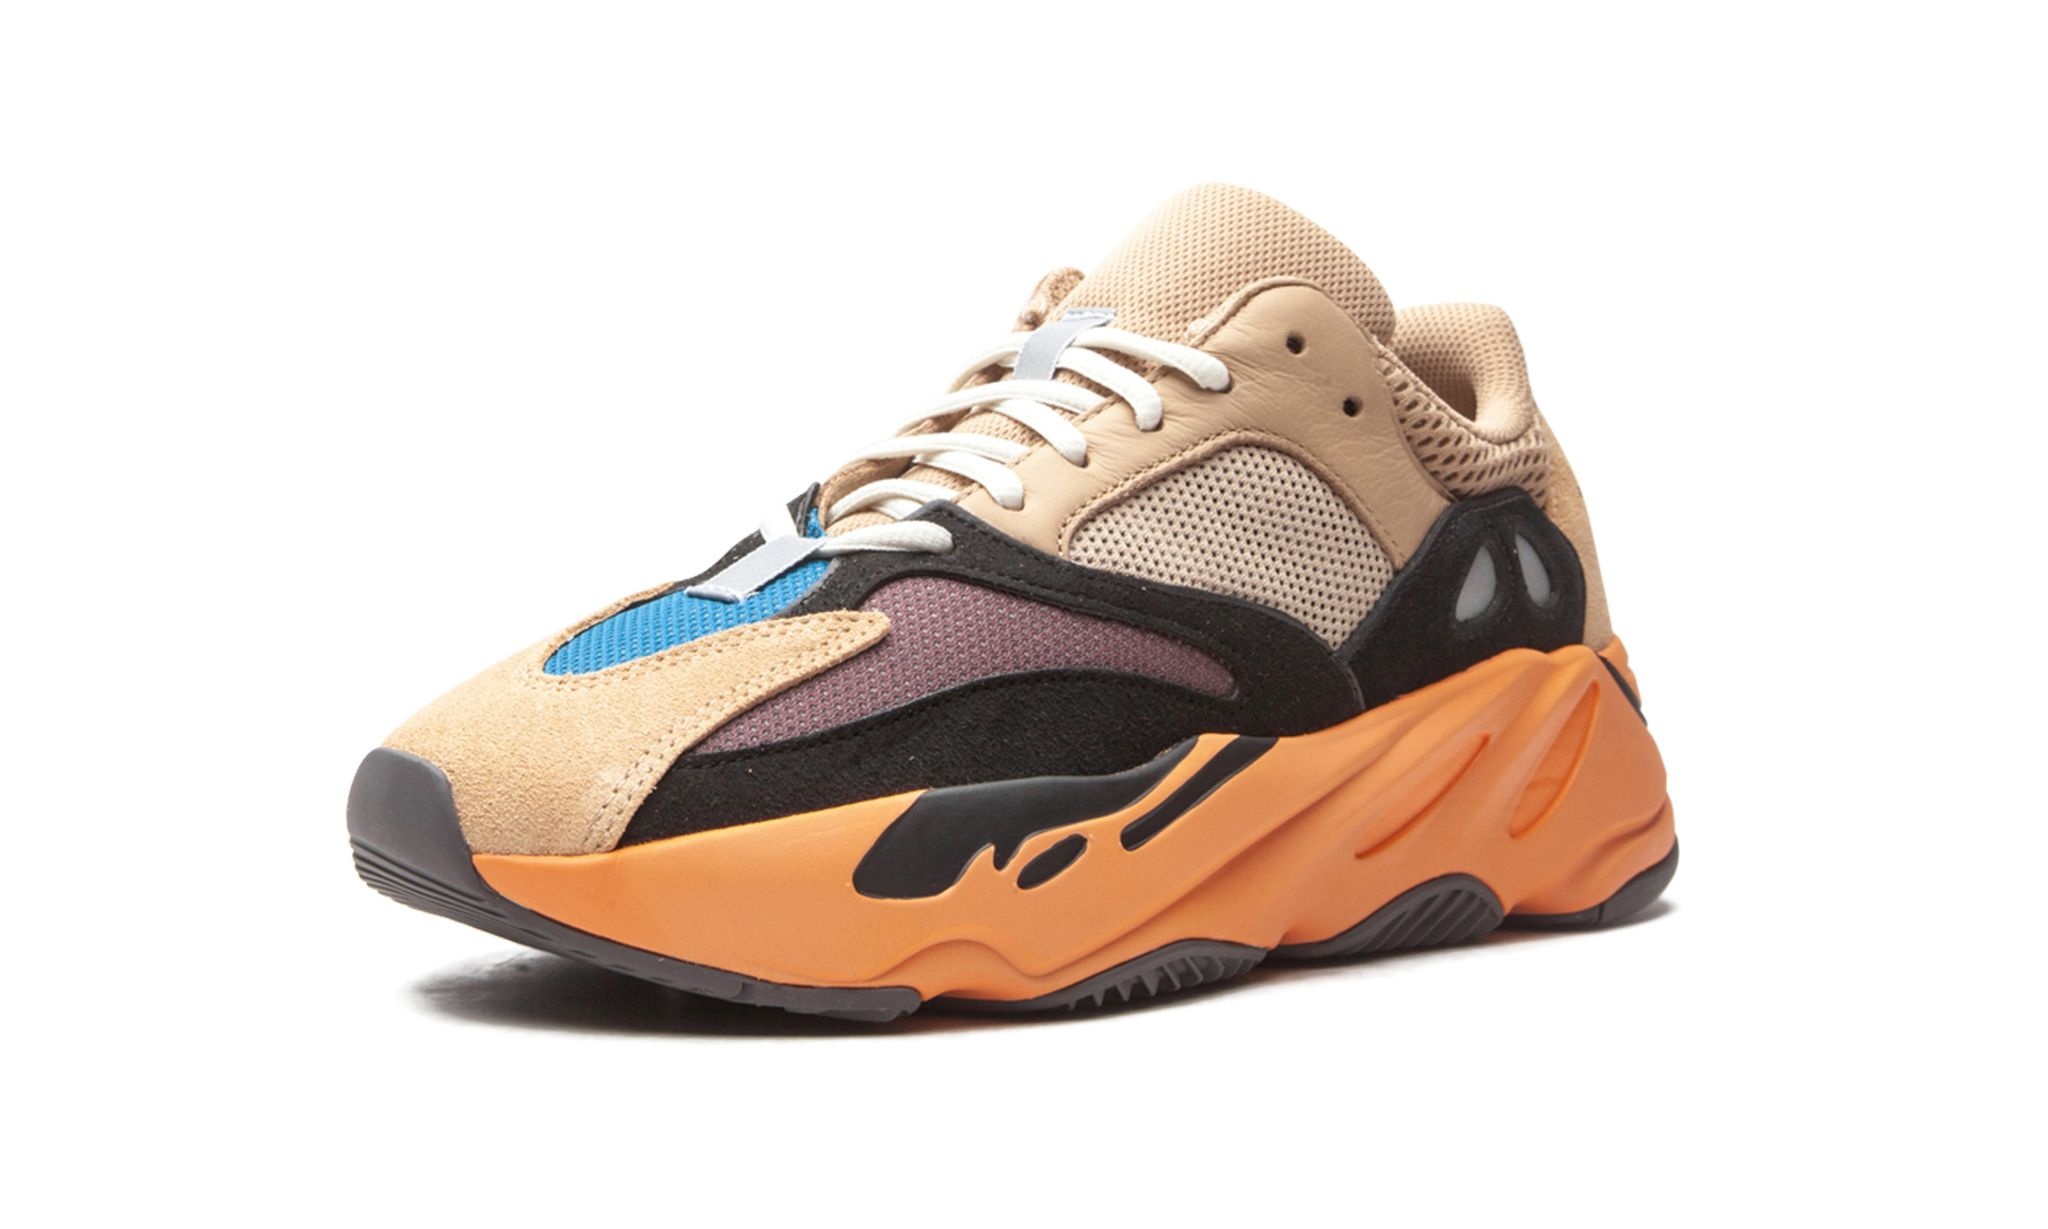 Yeezy Boost 700 "Enflame Amber" - 4